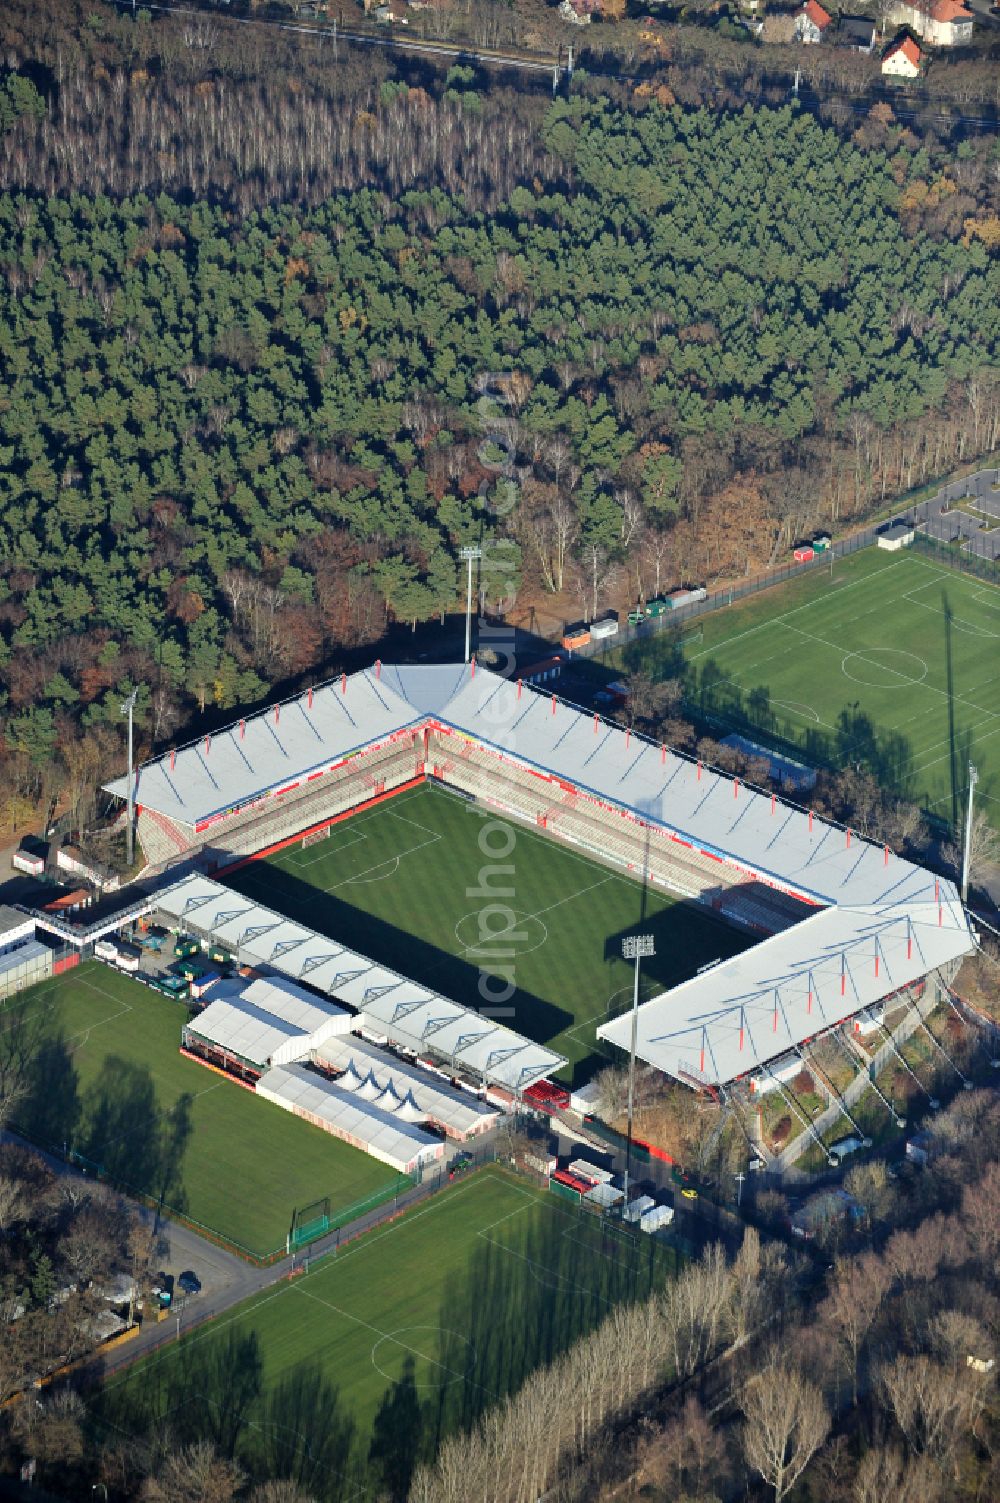 Aerial image Berlin - View of the football stadium Alte Foersterei with its new grandstand the district of Koepenick in Berlin. The pitch is homestead for the football games of FC Union Berlin